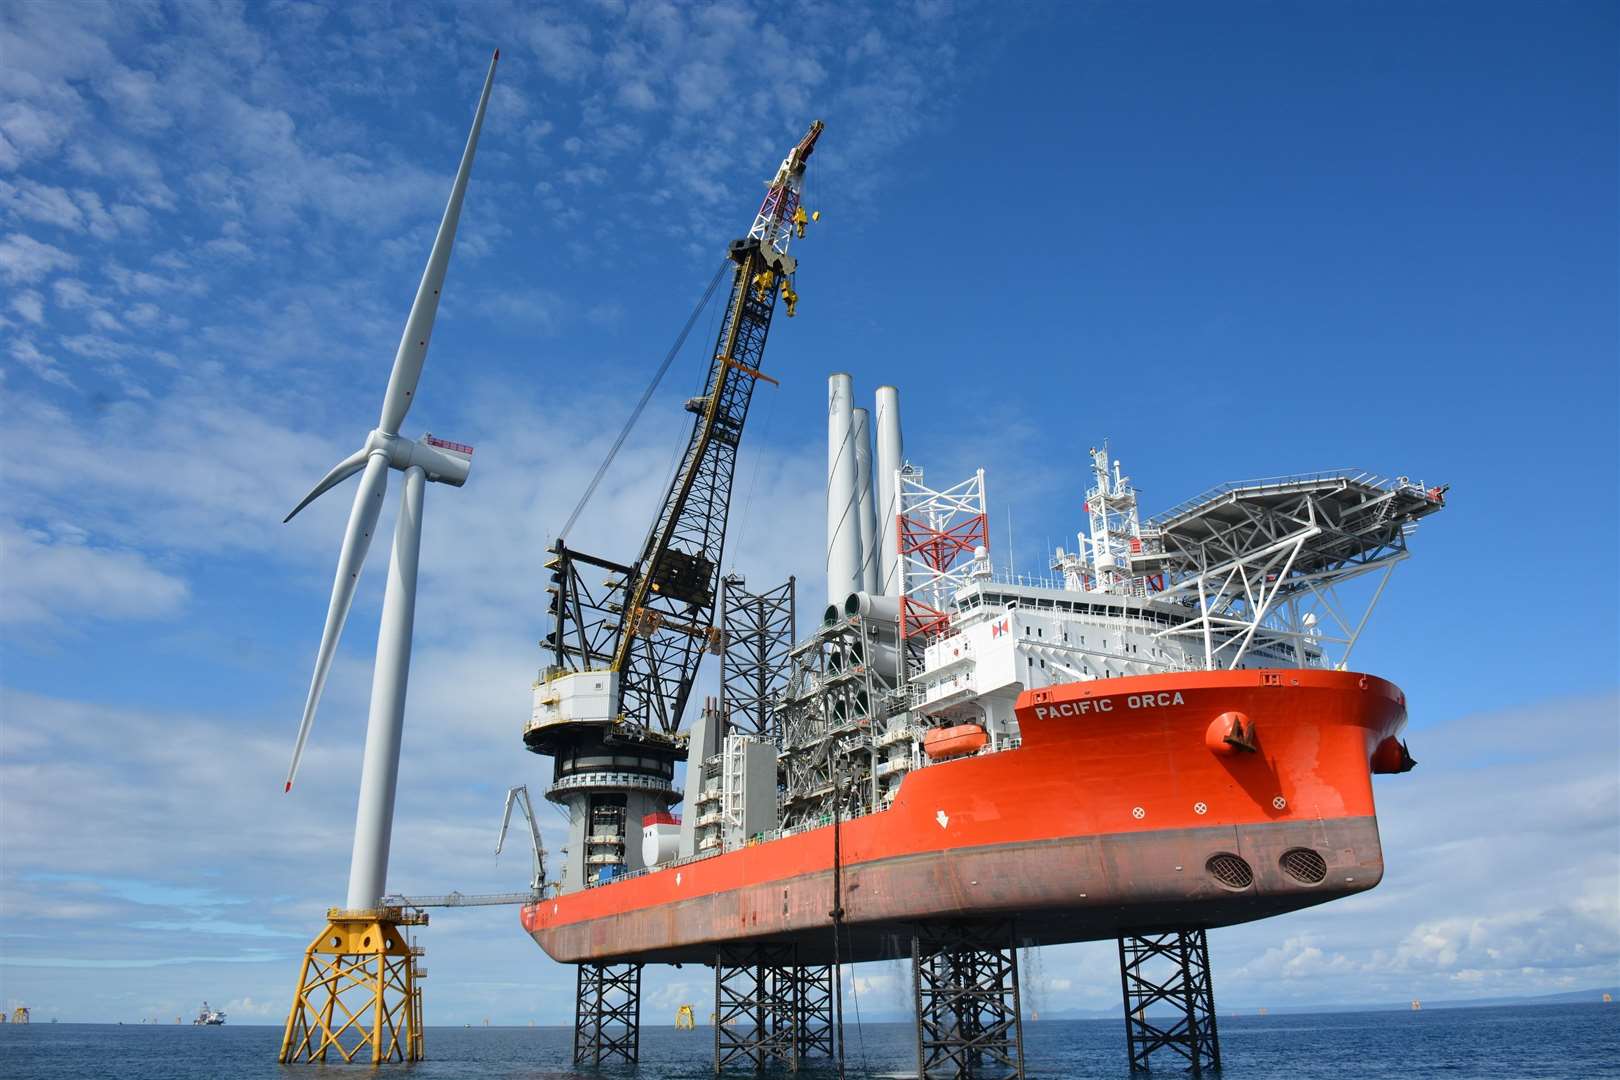 Pioneering offshore work took place in the Moray Firth when Beatrice offshore wind farm was being constructed. Picture: Bowl